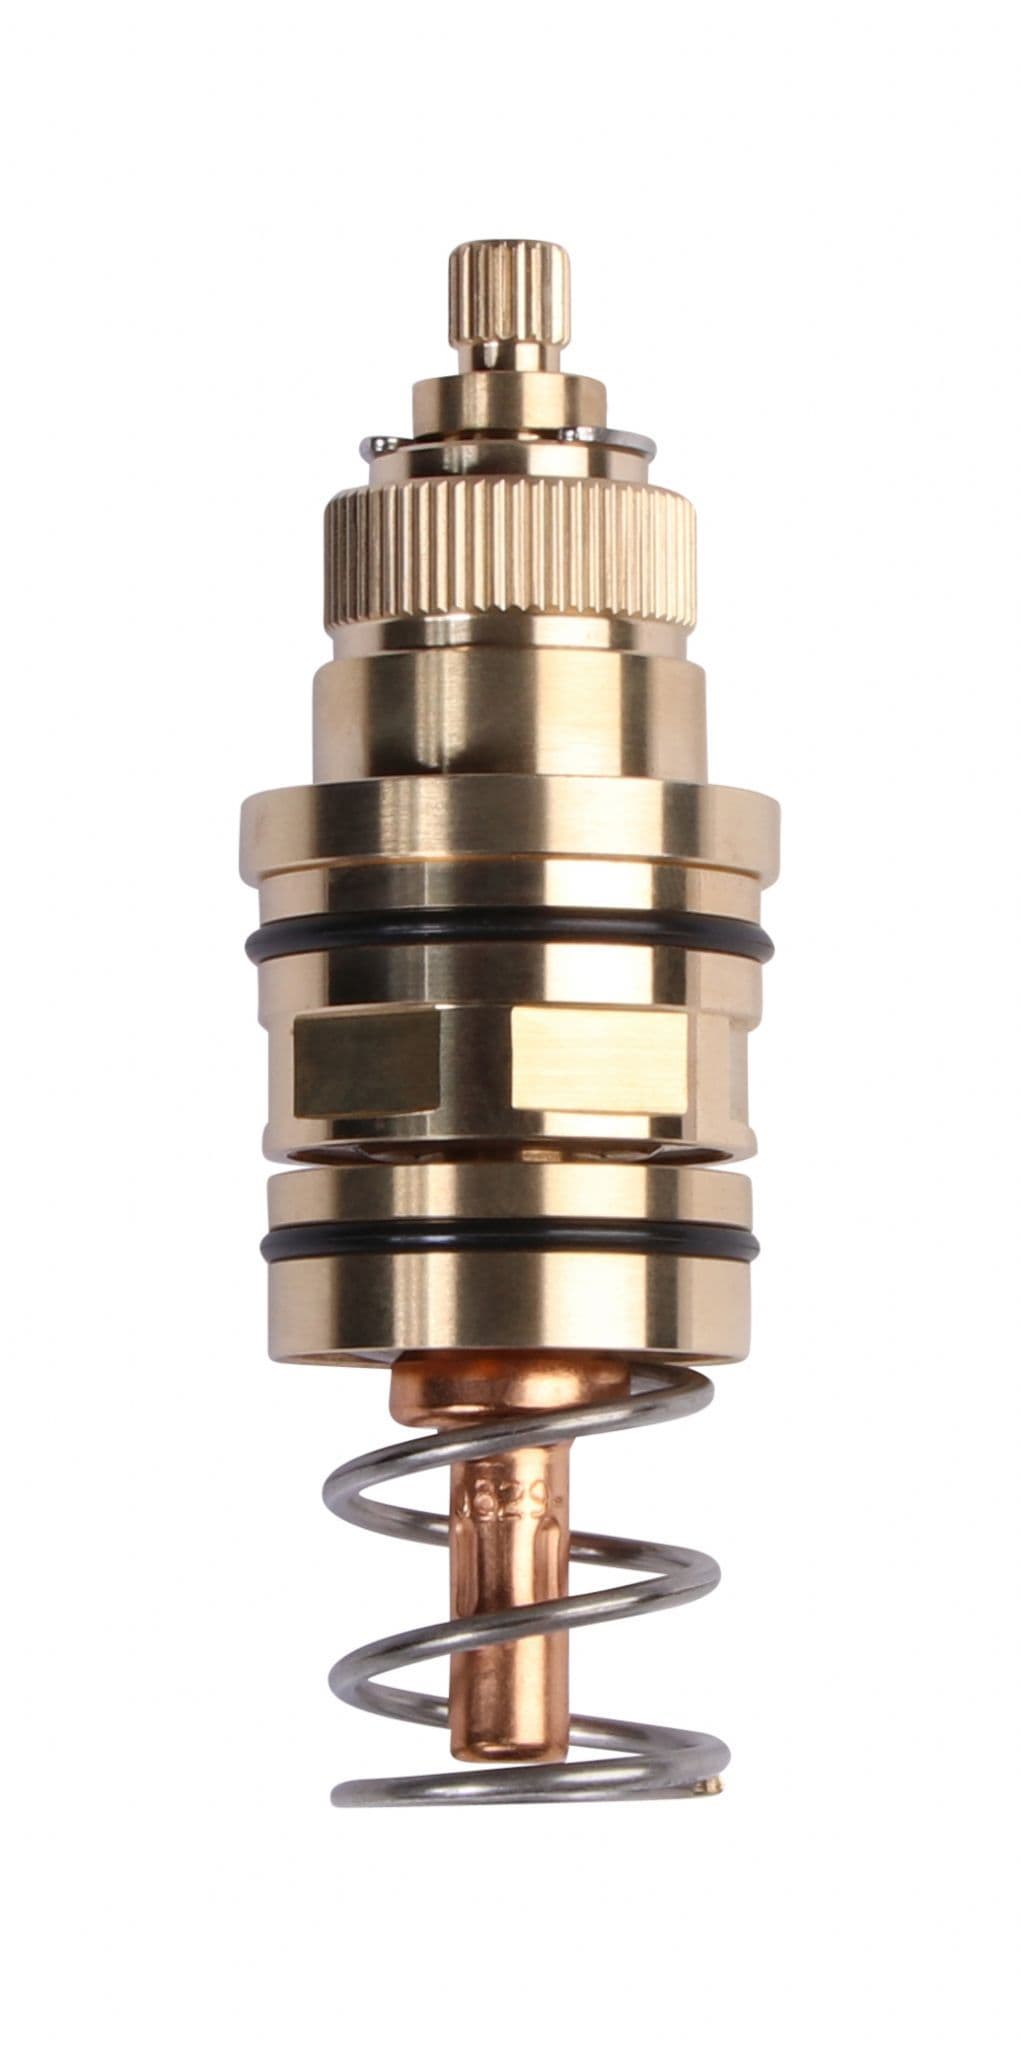 Thermostatic Shower Cartridges